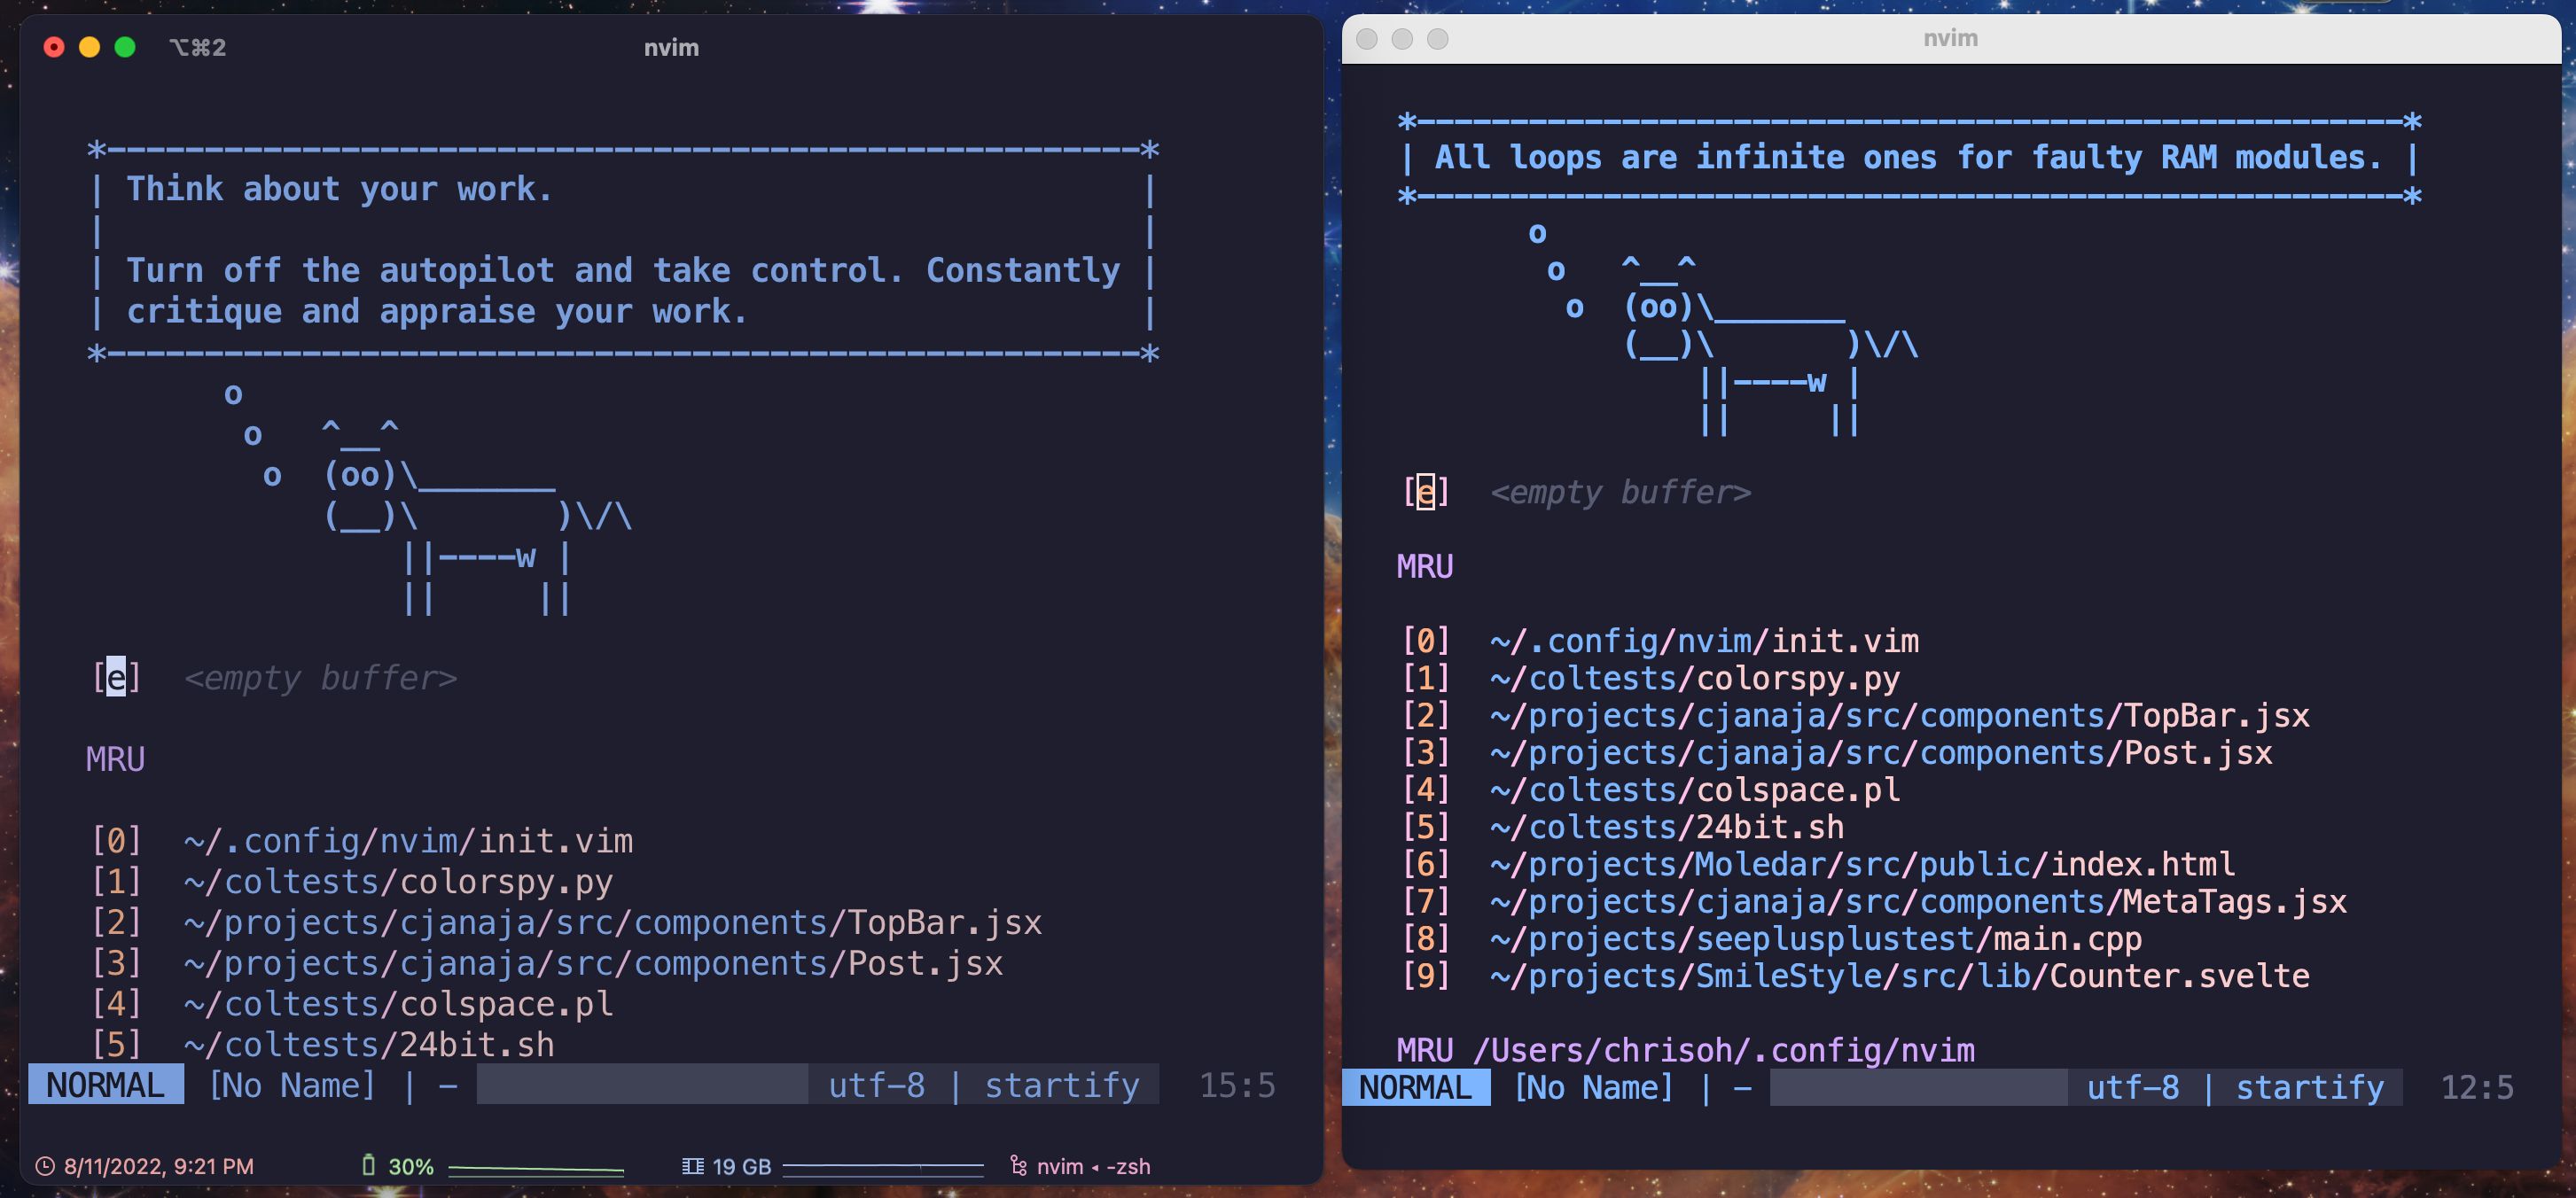 iterm2 on the left and alacritty on the right, with different text weights